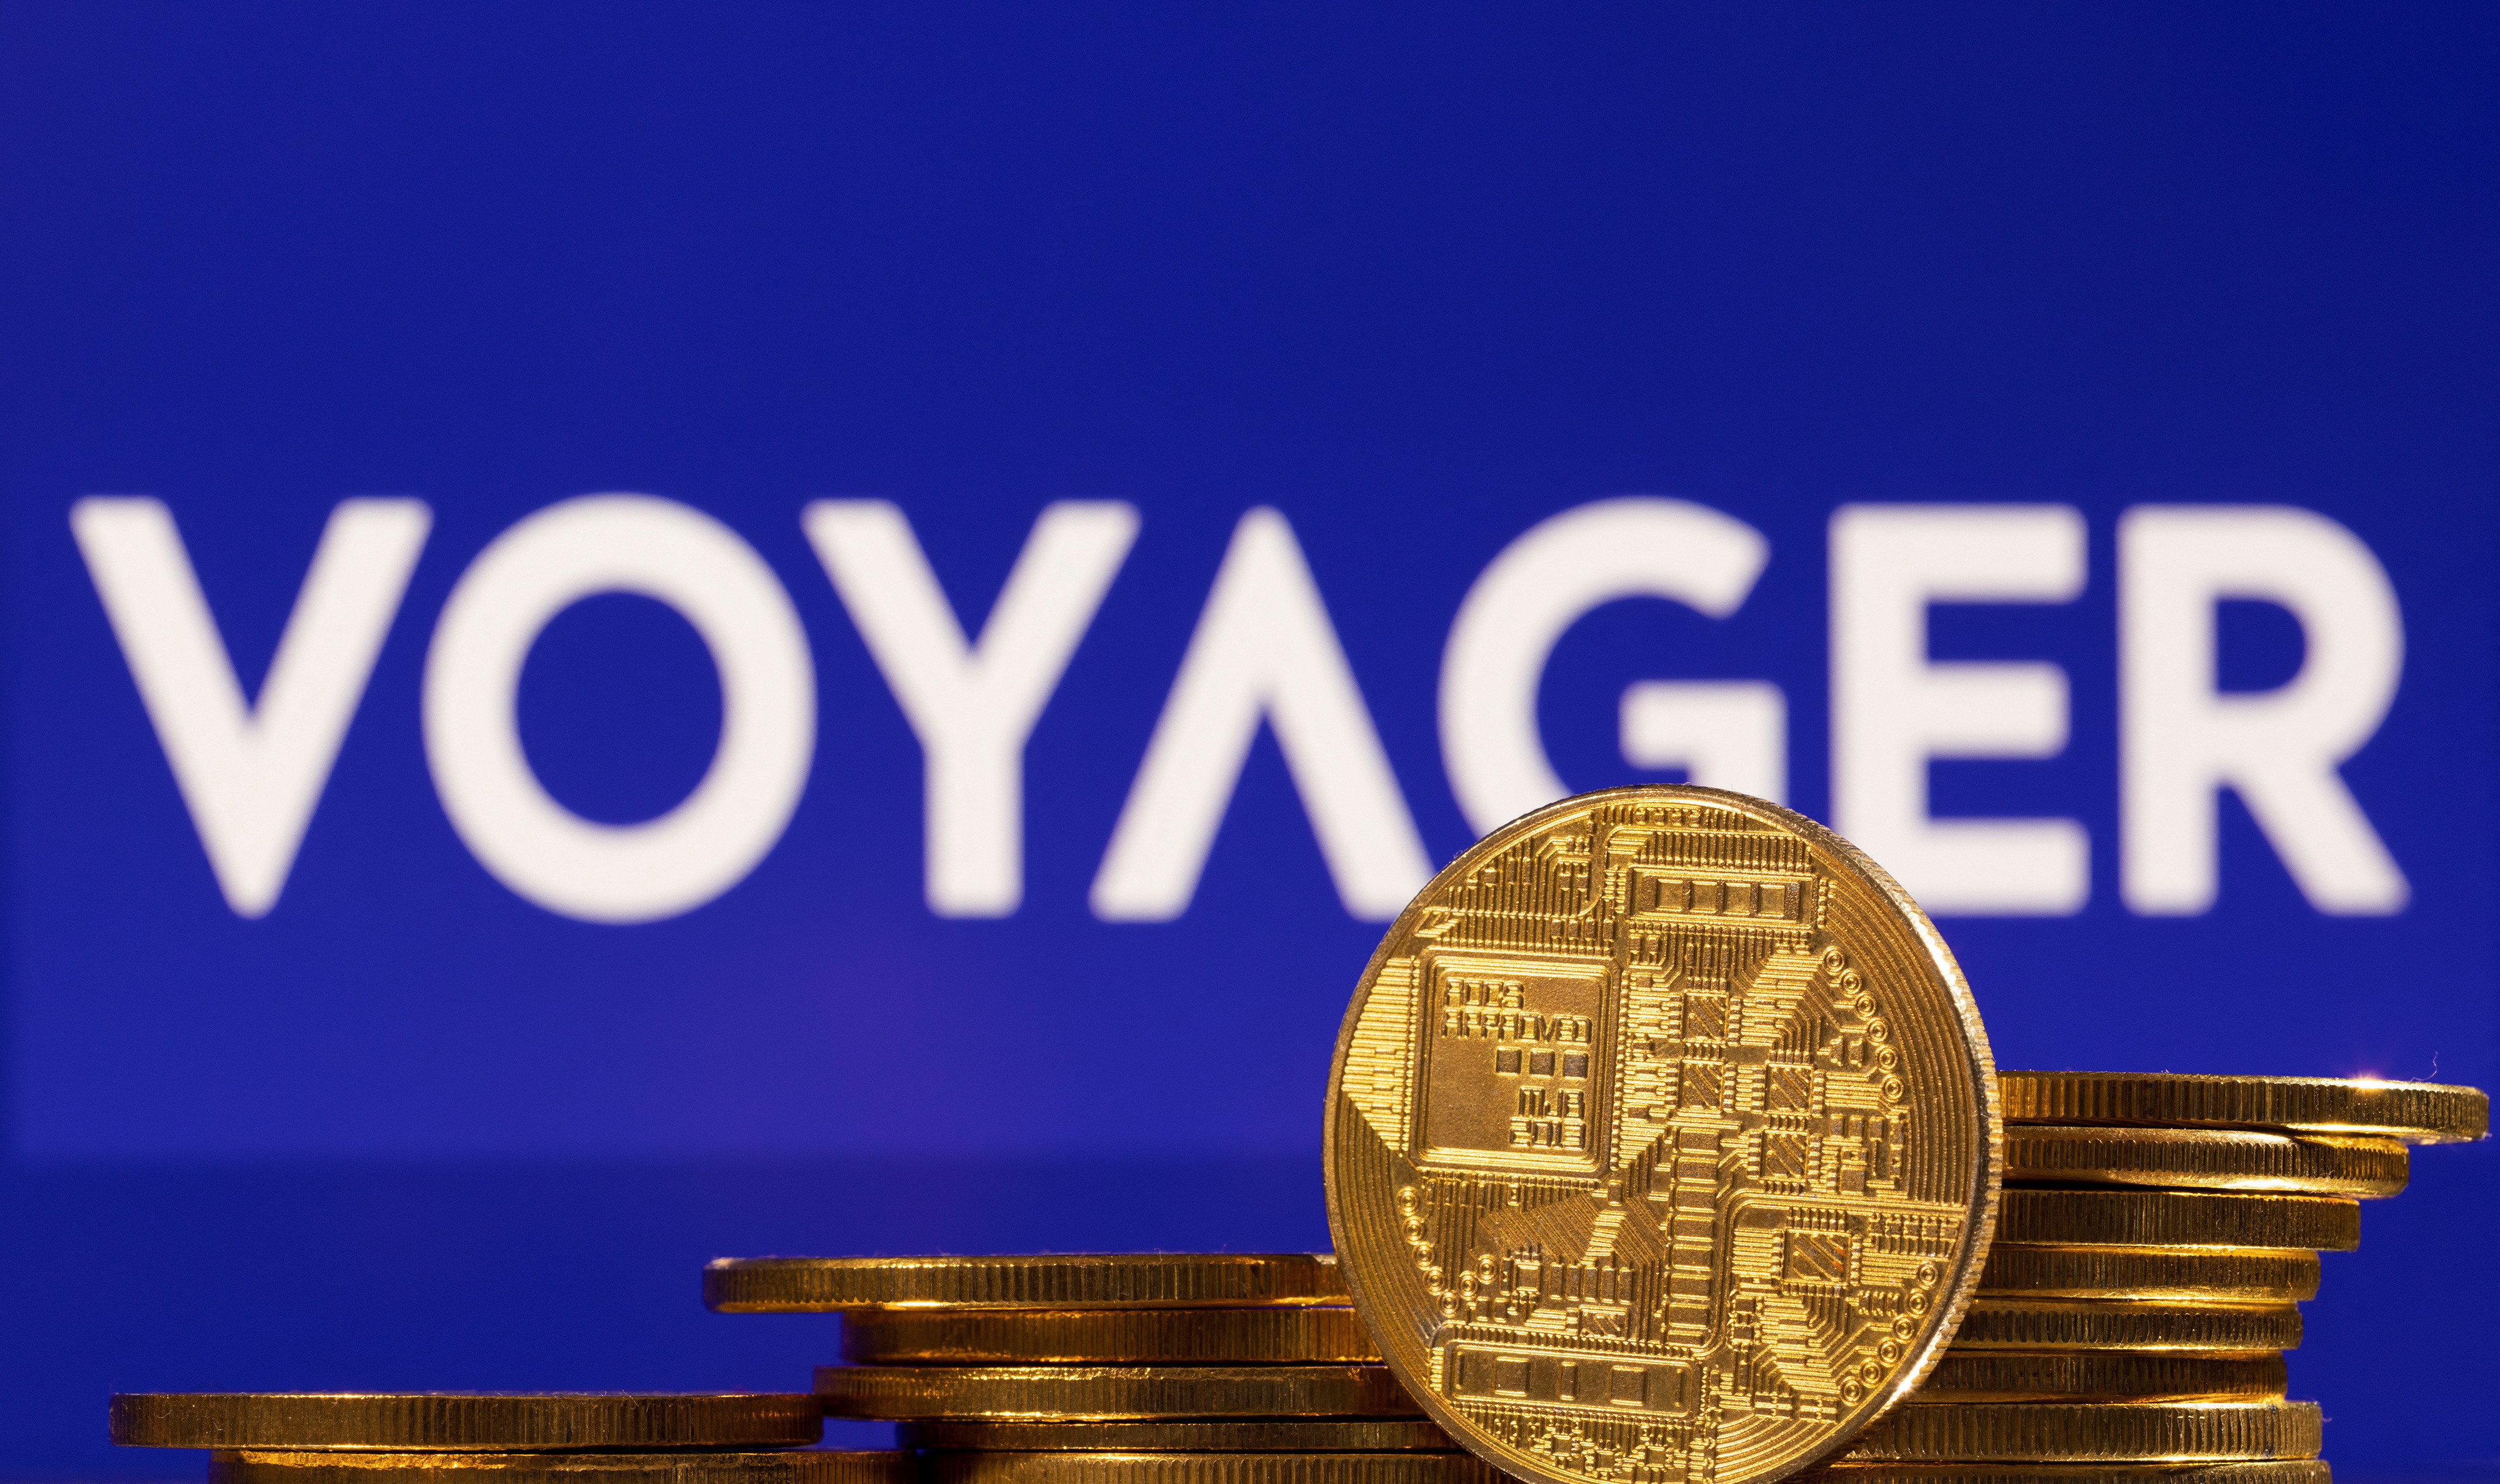  Voyager Digital to sell assets to Binance.US